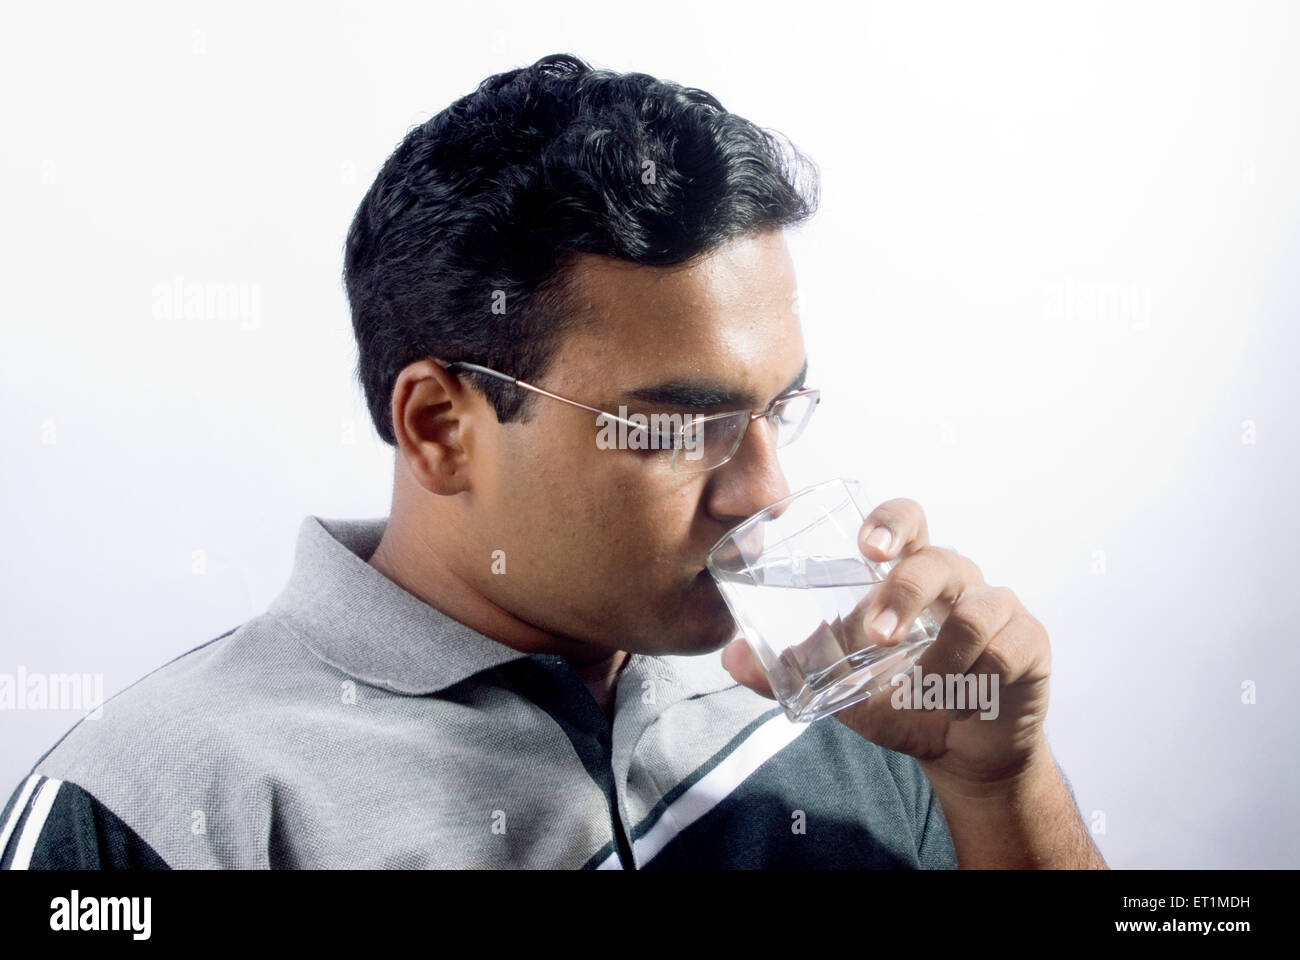 Young man drinking water from glass ; India MR#556 Stock Photo